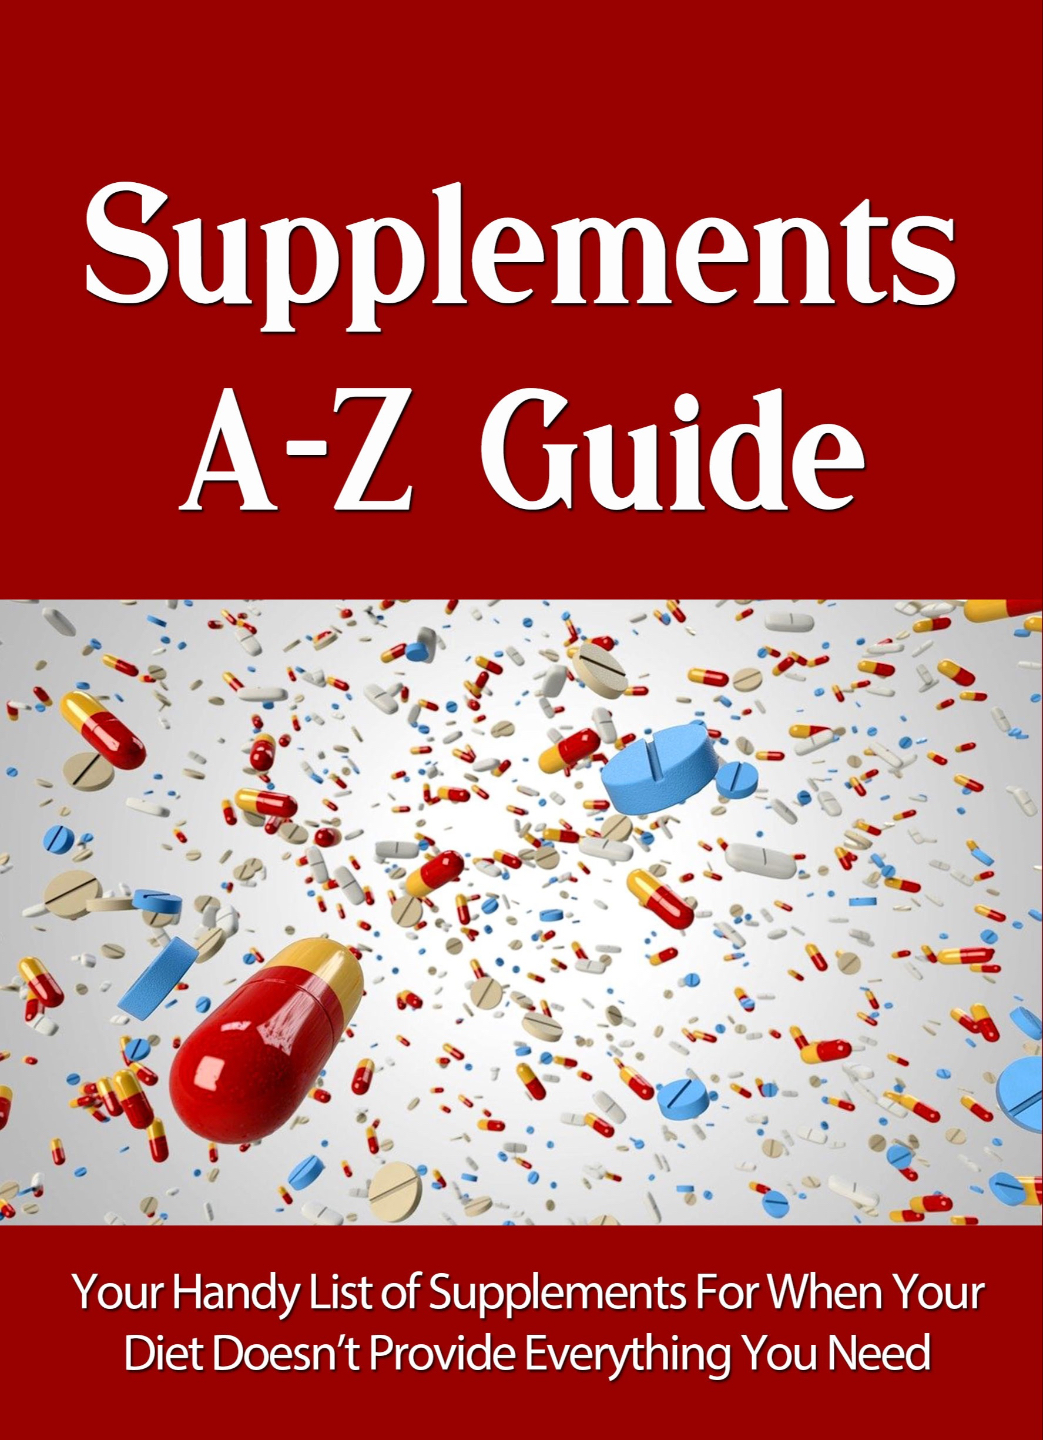 Supplements A-Z Course Cover